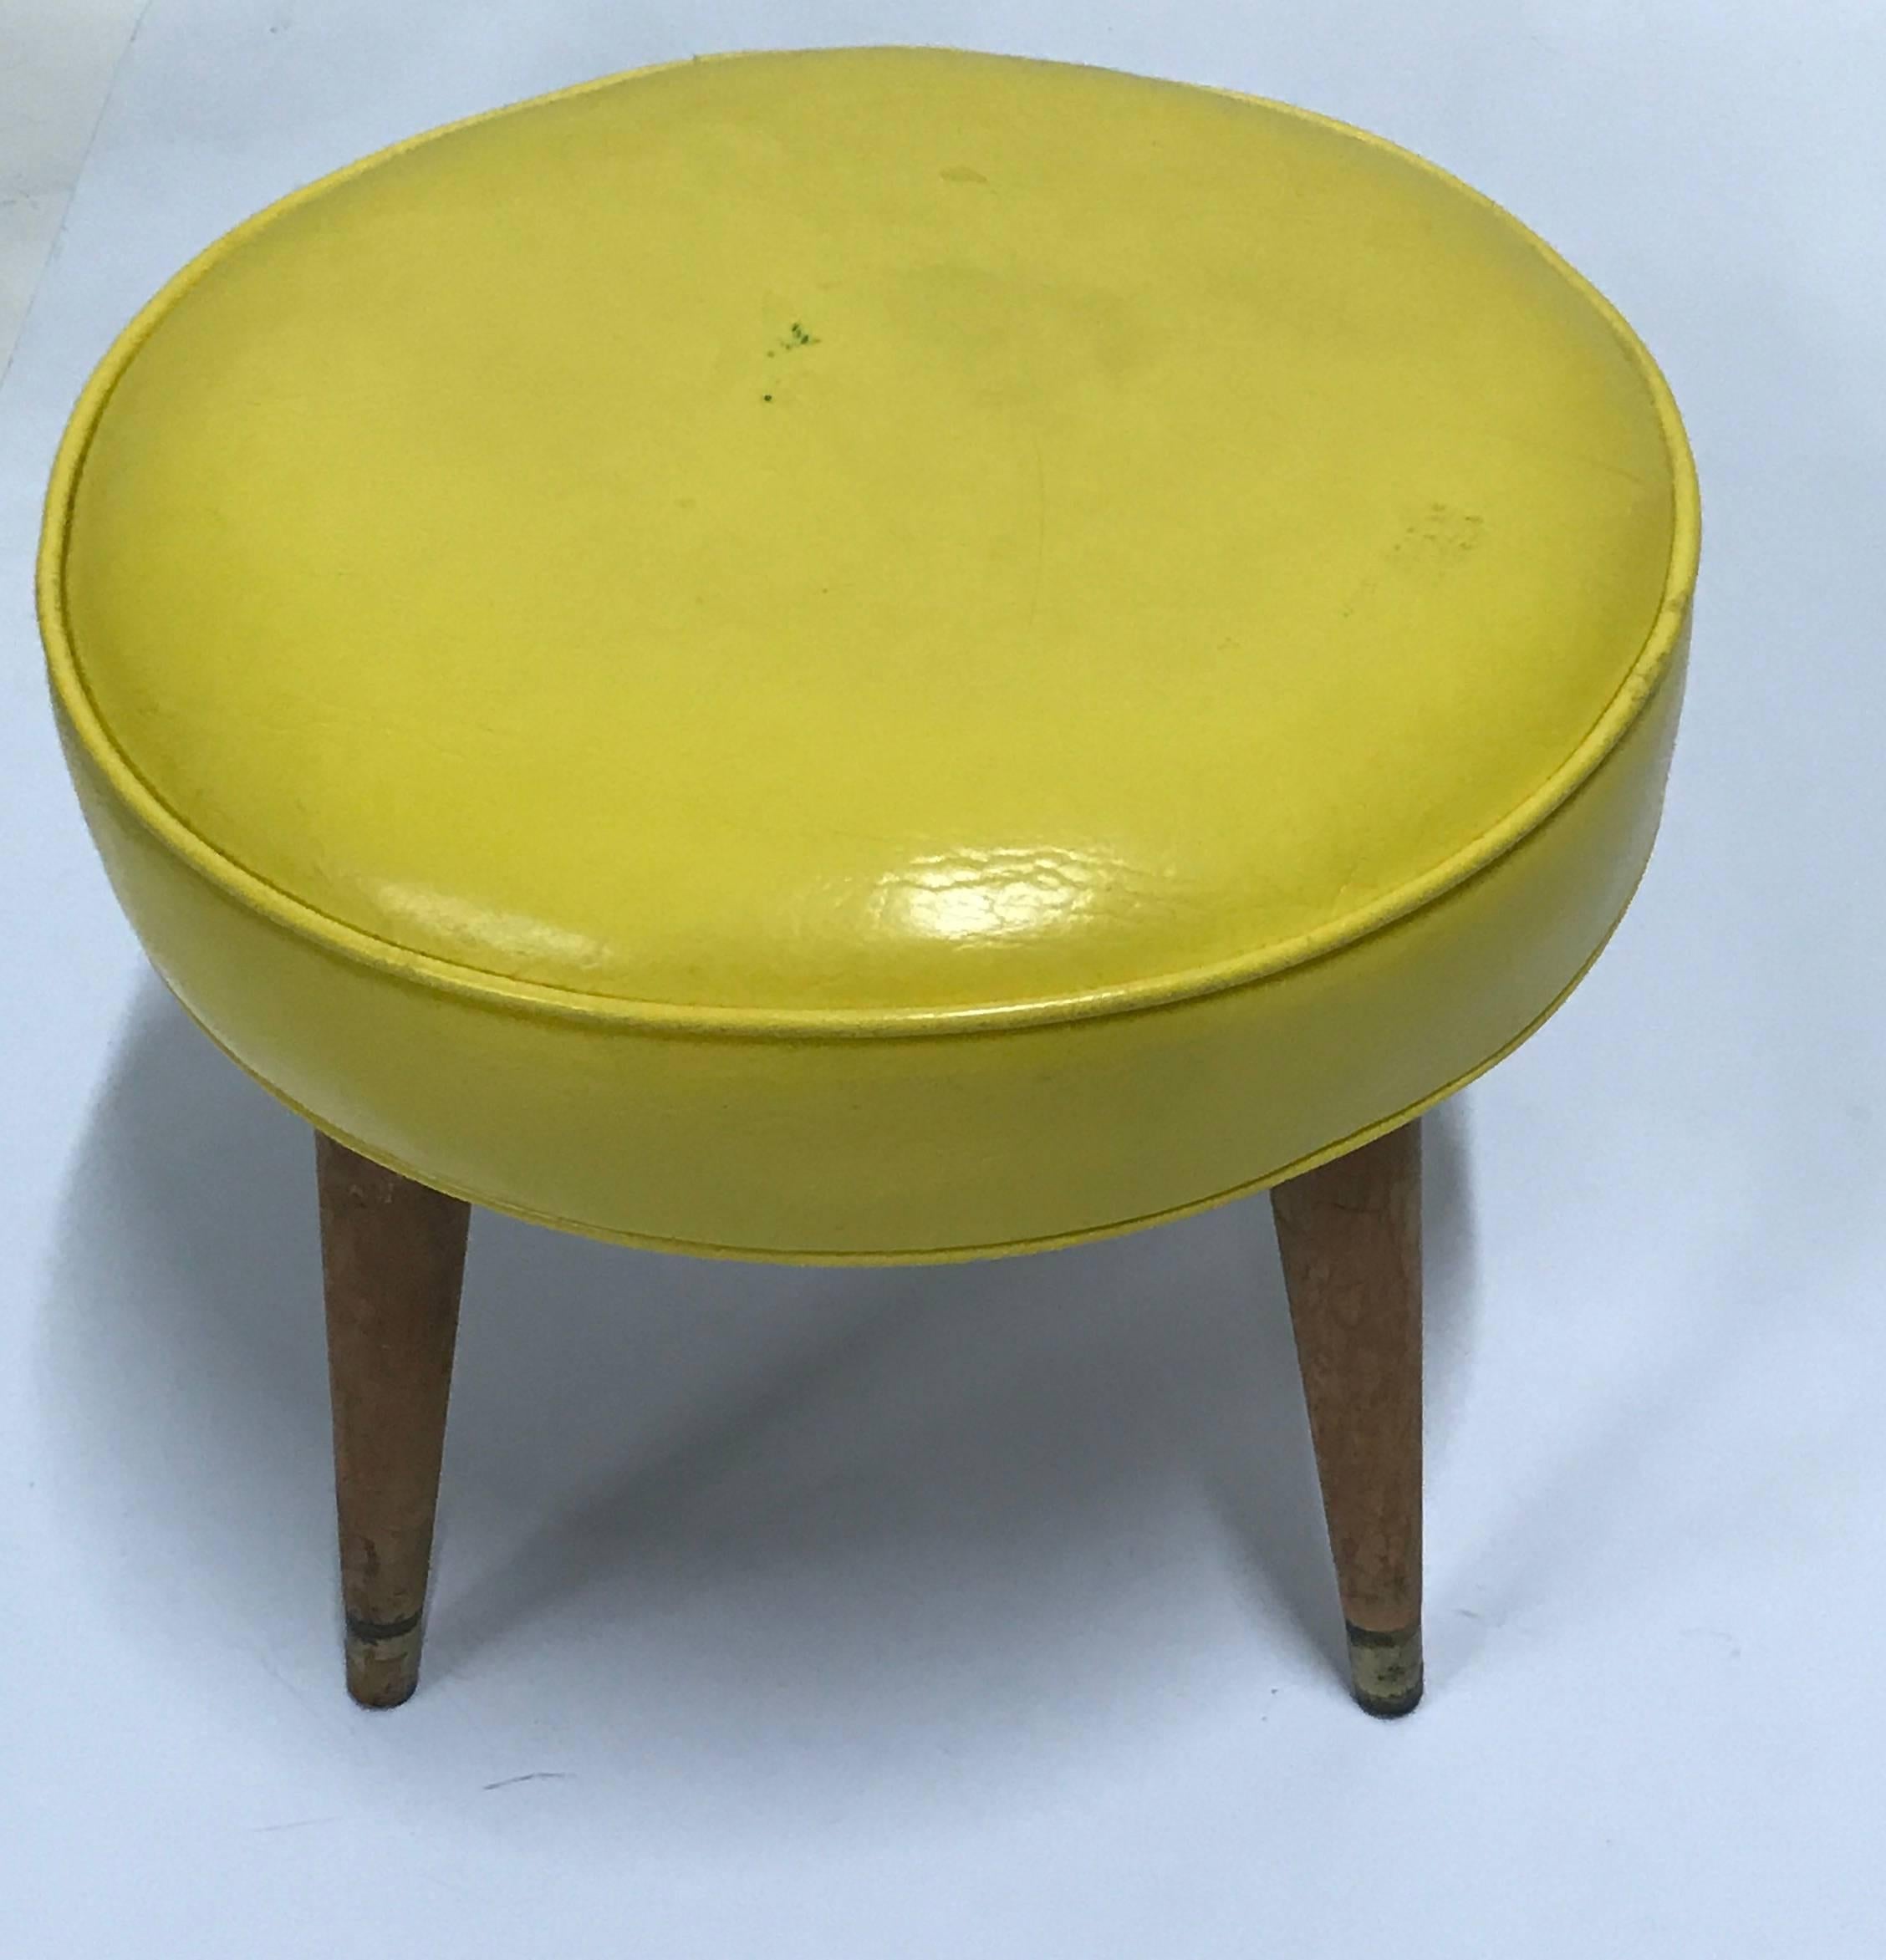 Cool Mid-Century Modern stool, Ottoman, tapered splayed light maple wood legs with brass ferules, cool shiny coated yellow vinyl upholstery with double welting, attributed to Paul McCobb.